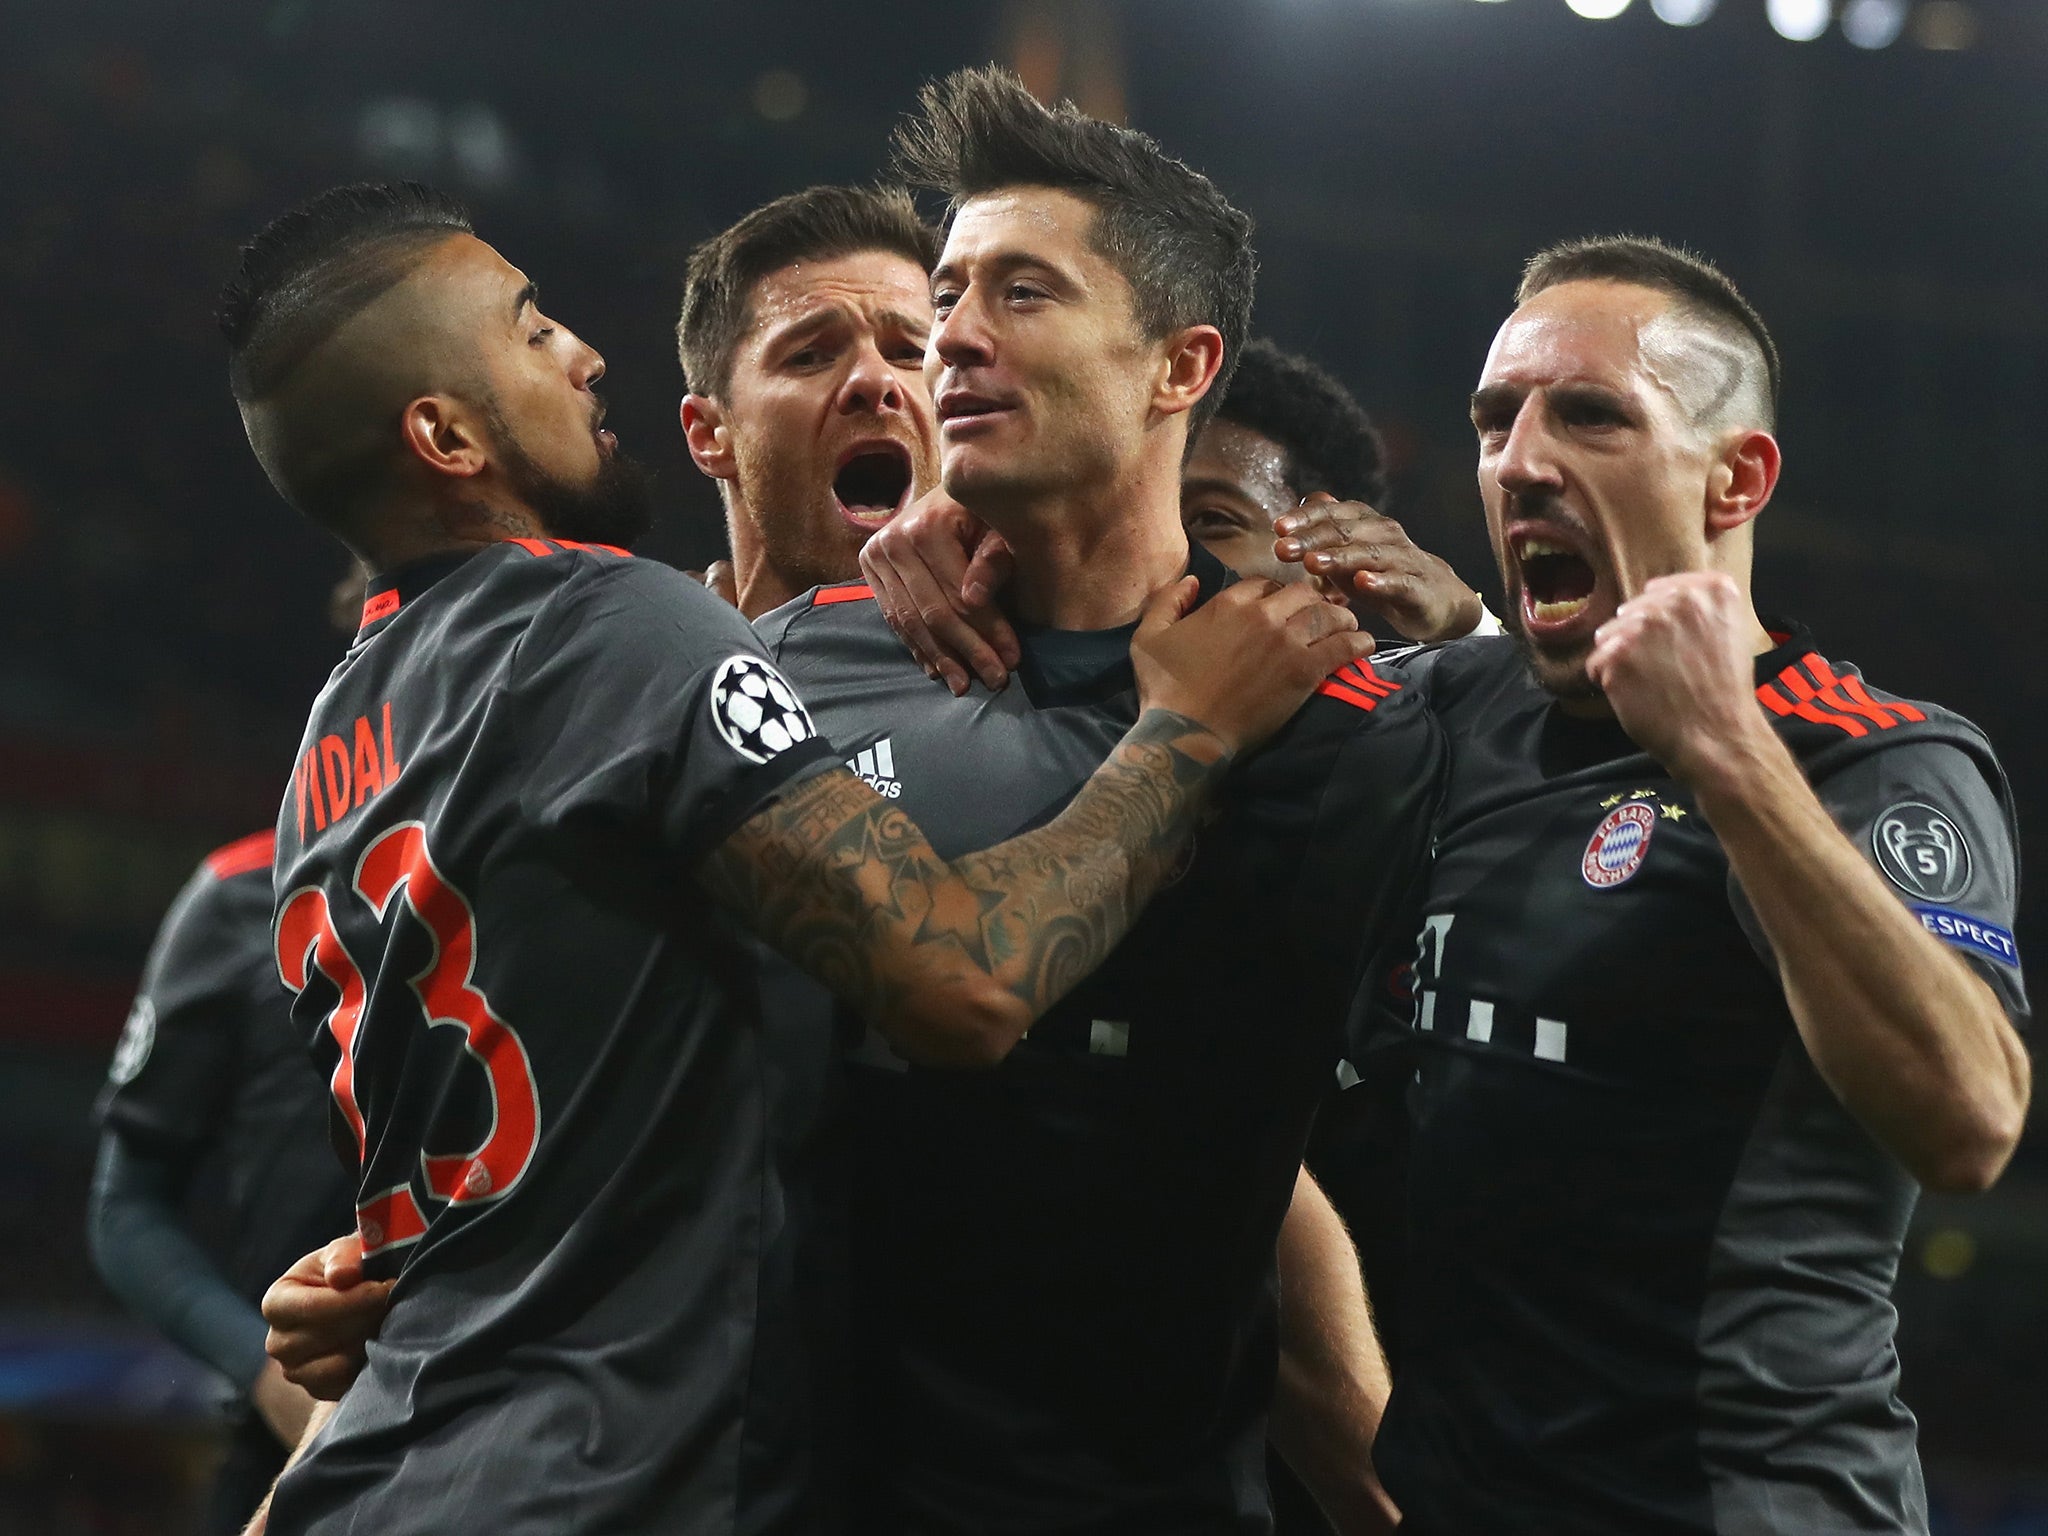 Robert Lewandowski levelled the scores on the night by converting from the penalty spot